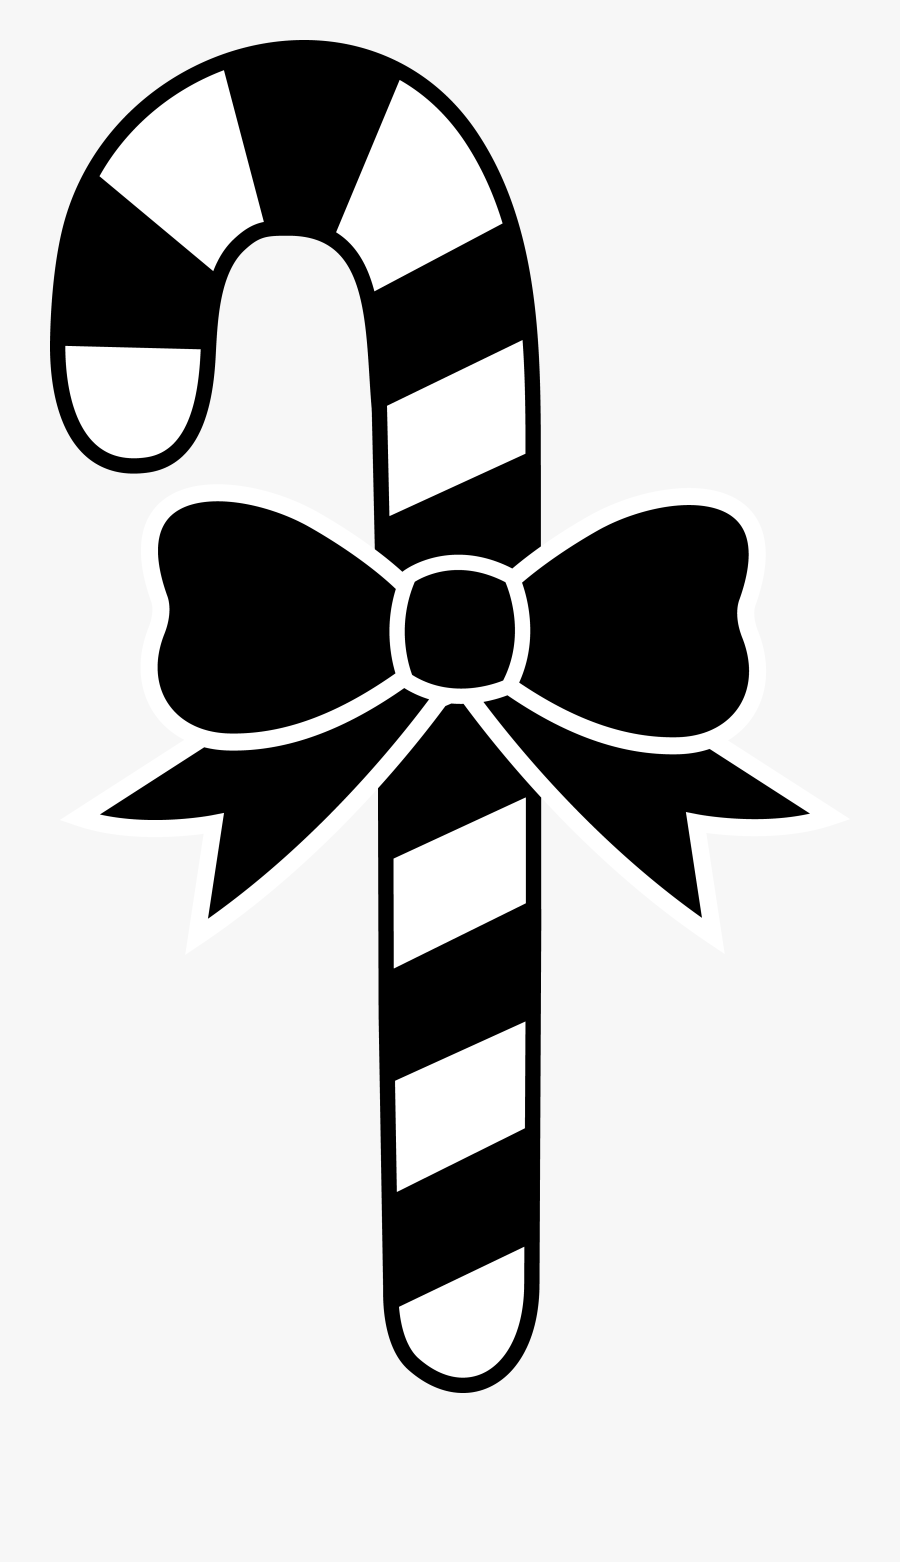 Clip Art Candycane With Bow Converttoblack - Candy Cane Black And White, Transparent Clipart